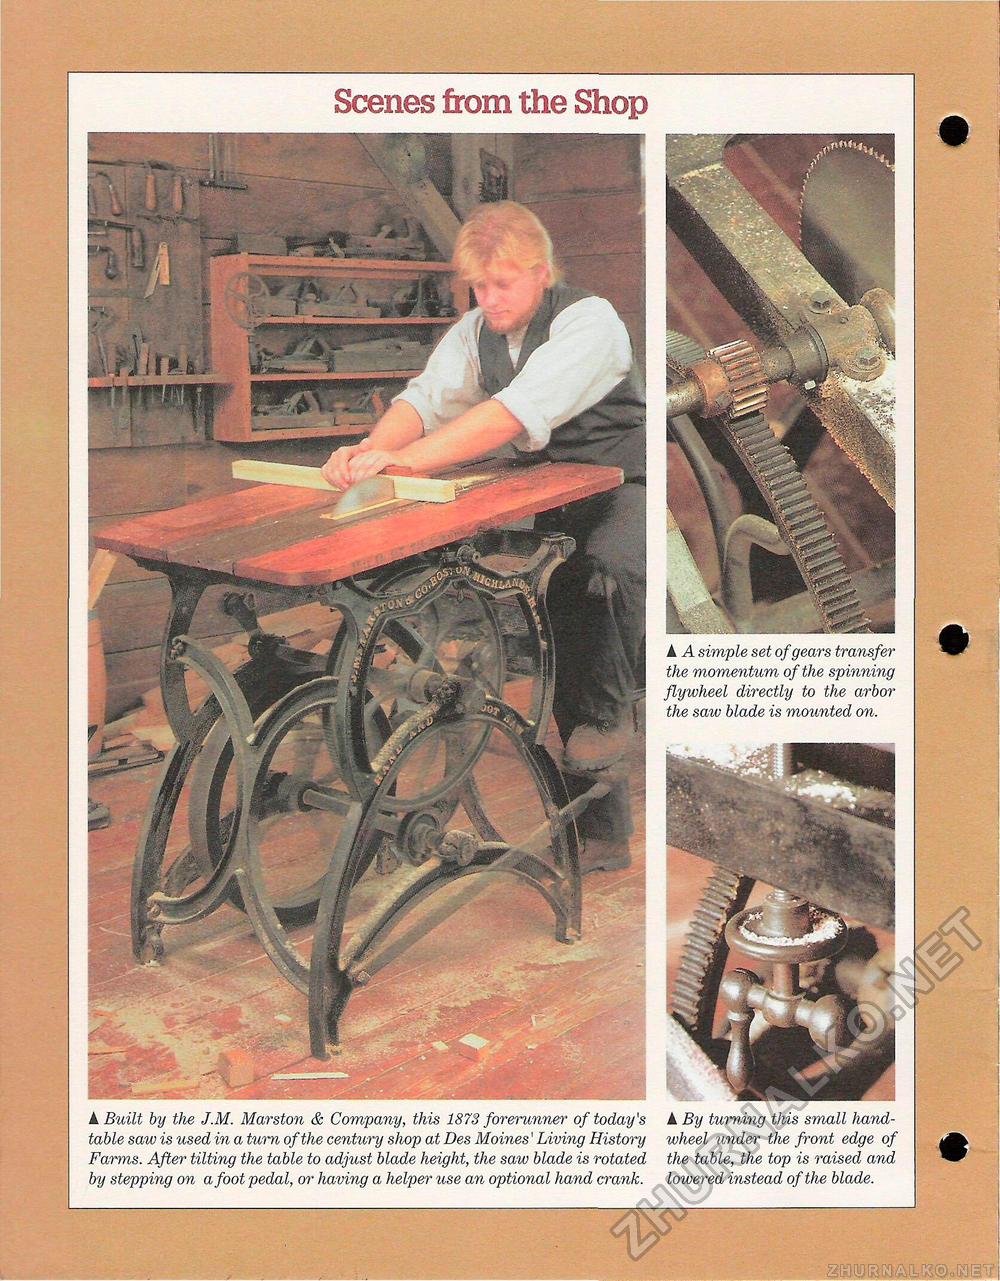 25 - Special Table Saw Issue,  32